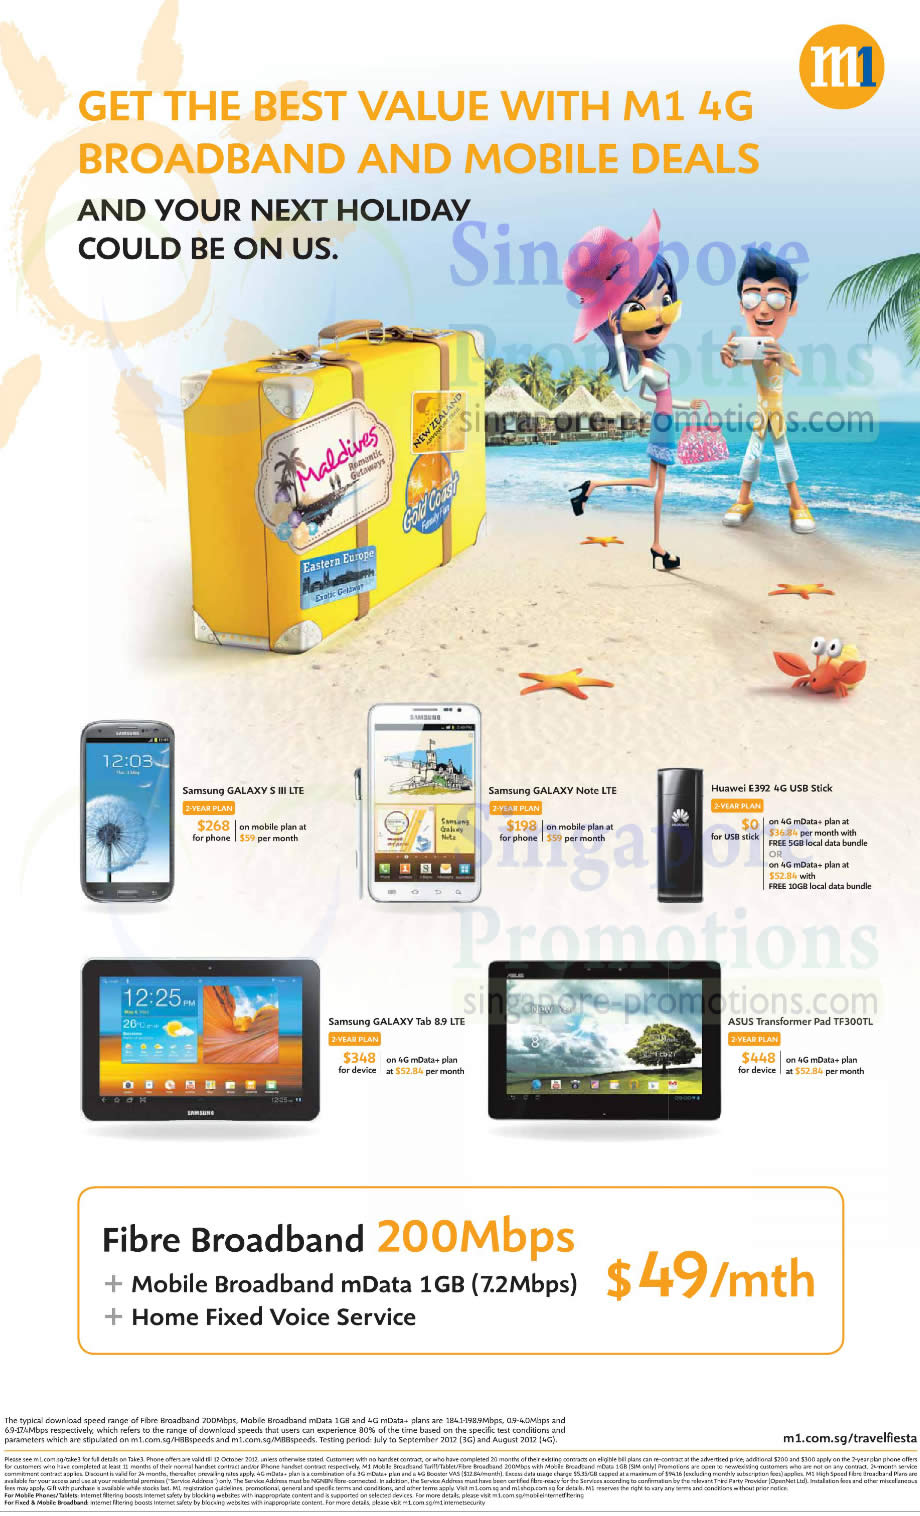 Featured image for M1 Smartphones, Tablets & Home/Mobile Broadband Offers 6 - 12 Oct 2012